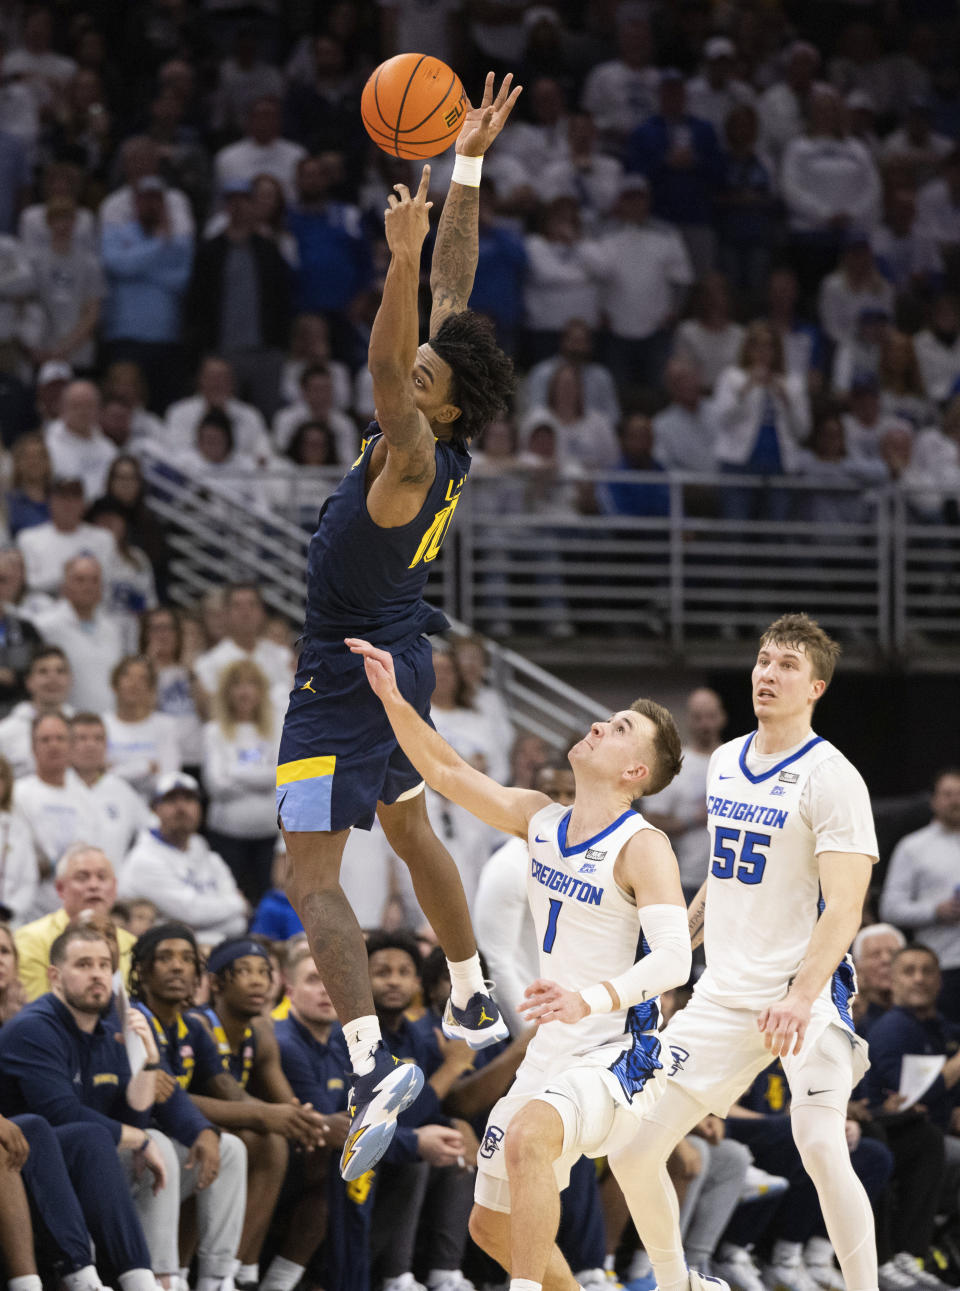 Marquette's Zaide Lowery (10) leaps to reach an overthrown pass against Creighton's Steven Ashworth (1) and Baylor Scheierman (55) during the second half of an NCAA college basketball game Saturday, March 2, 2024, in Omaha, Neb. Creighton defeated Marquette 89-75. (AP Photo/Rebecca S. Gratz)